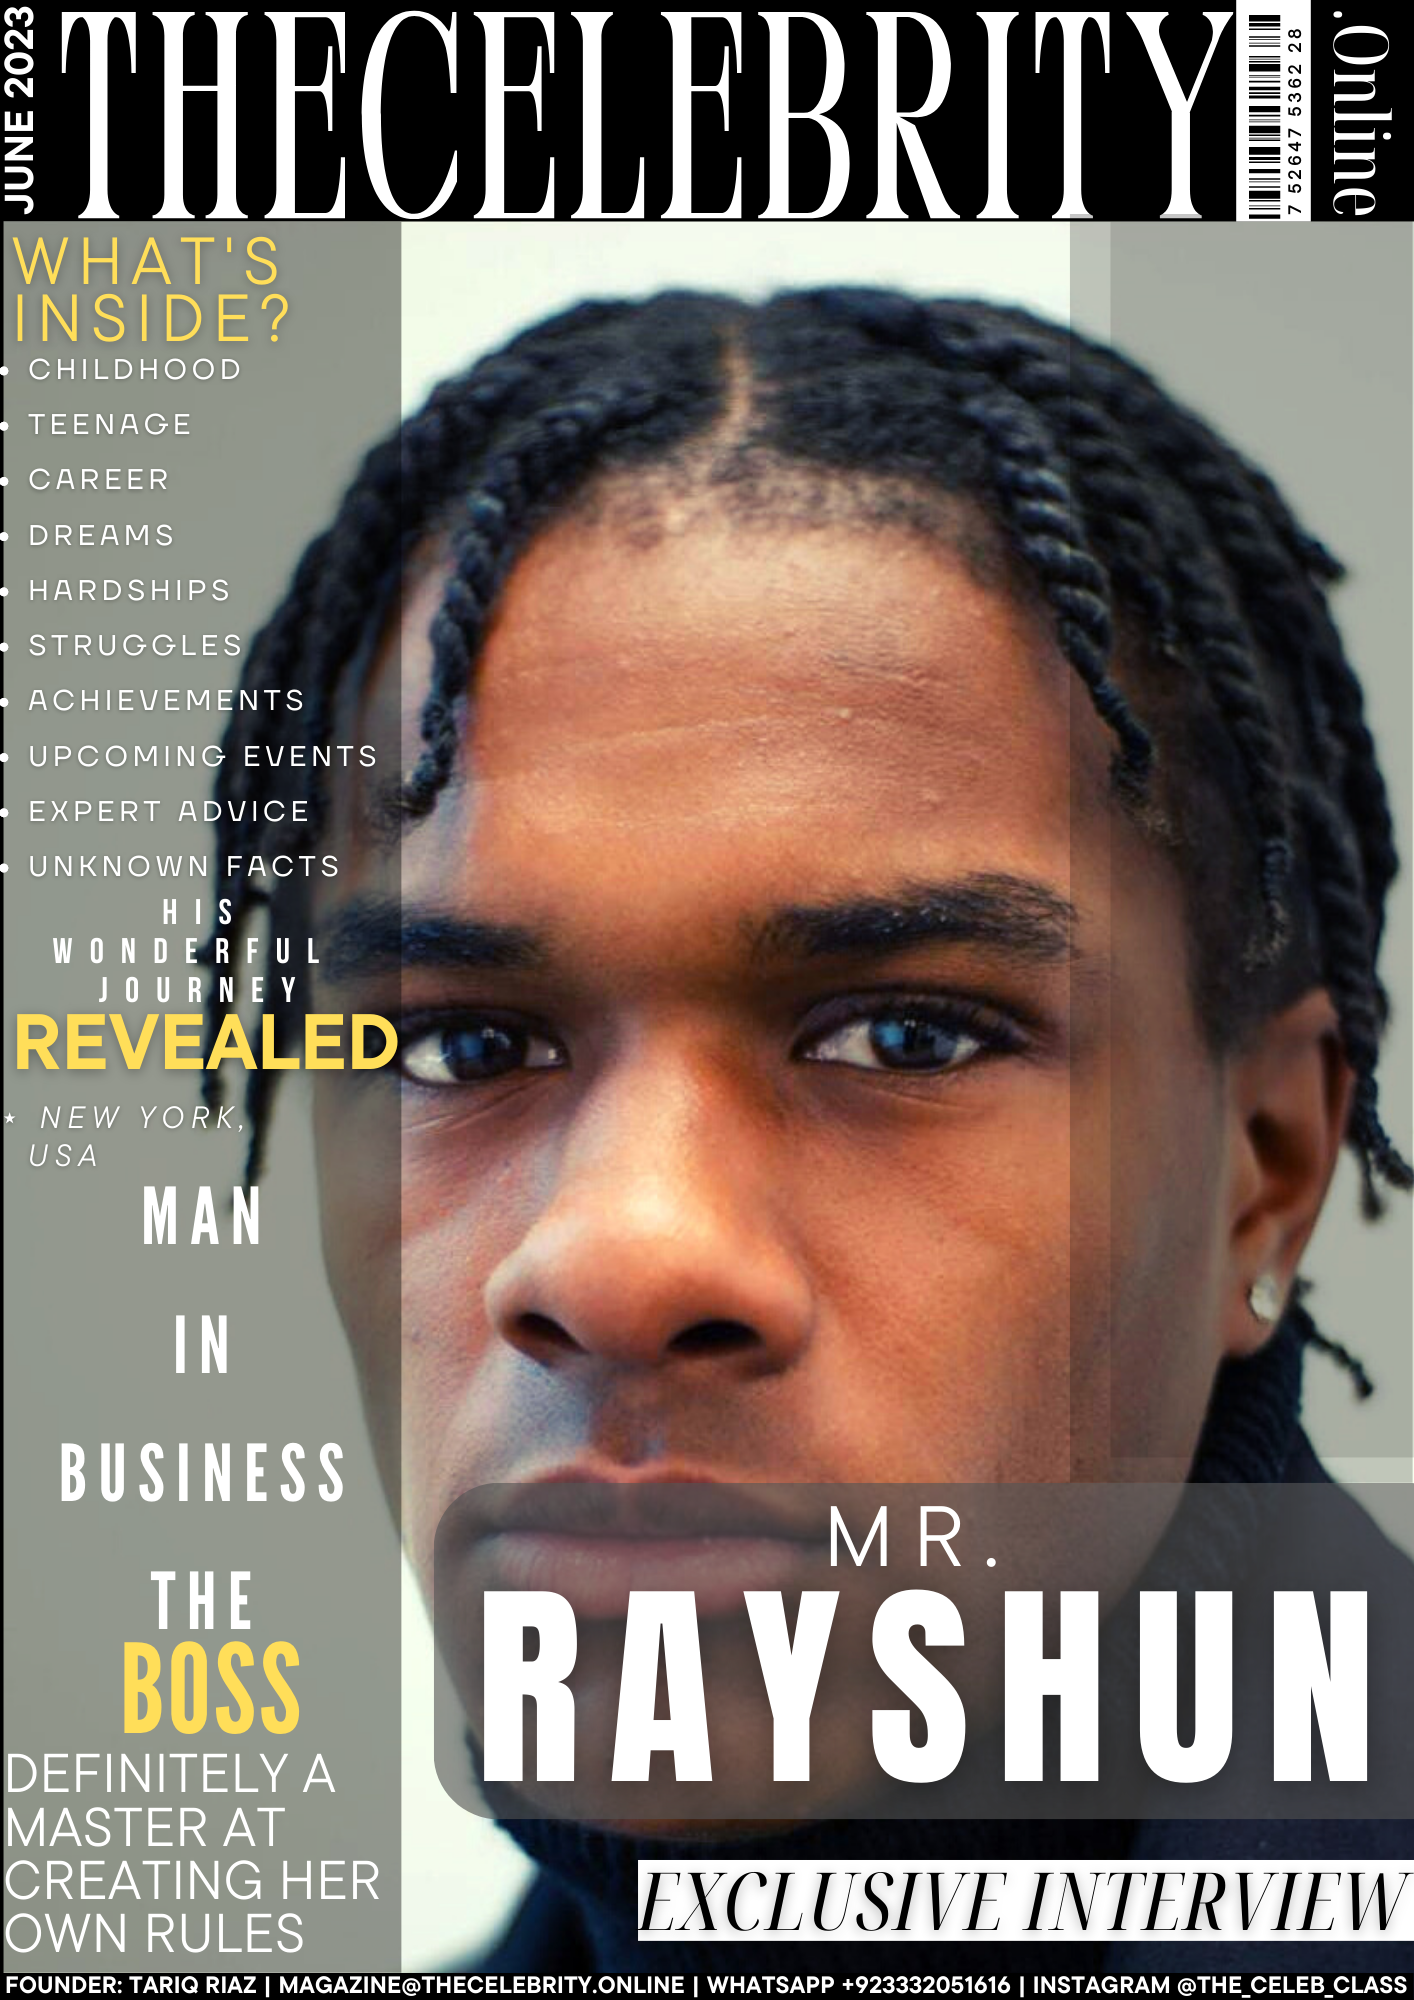 Rayshun Exclusive Interview – ‘Its Important To Take a Break And Spend Time With Friends And Family’